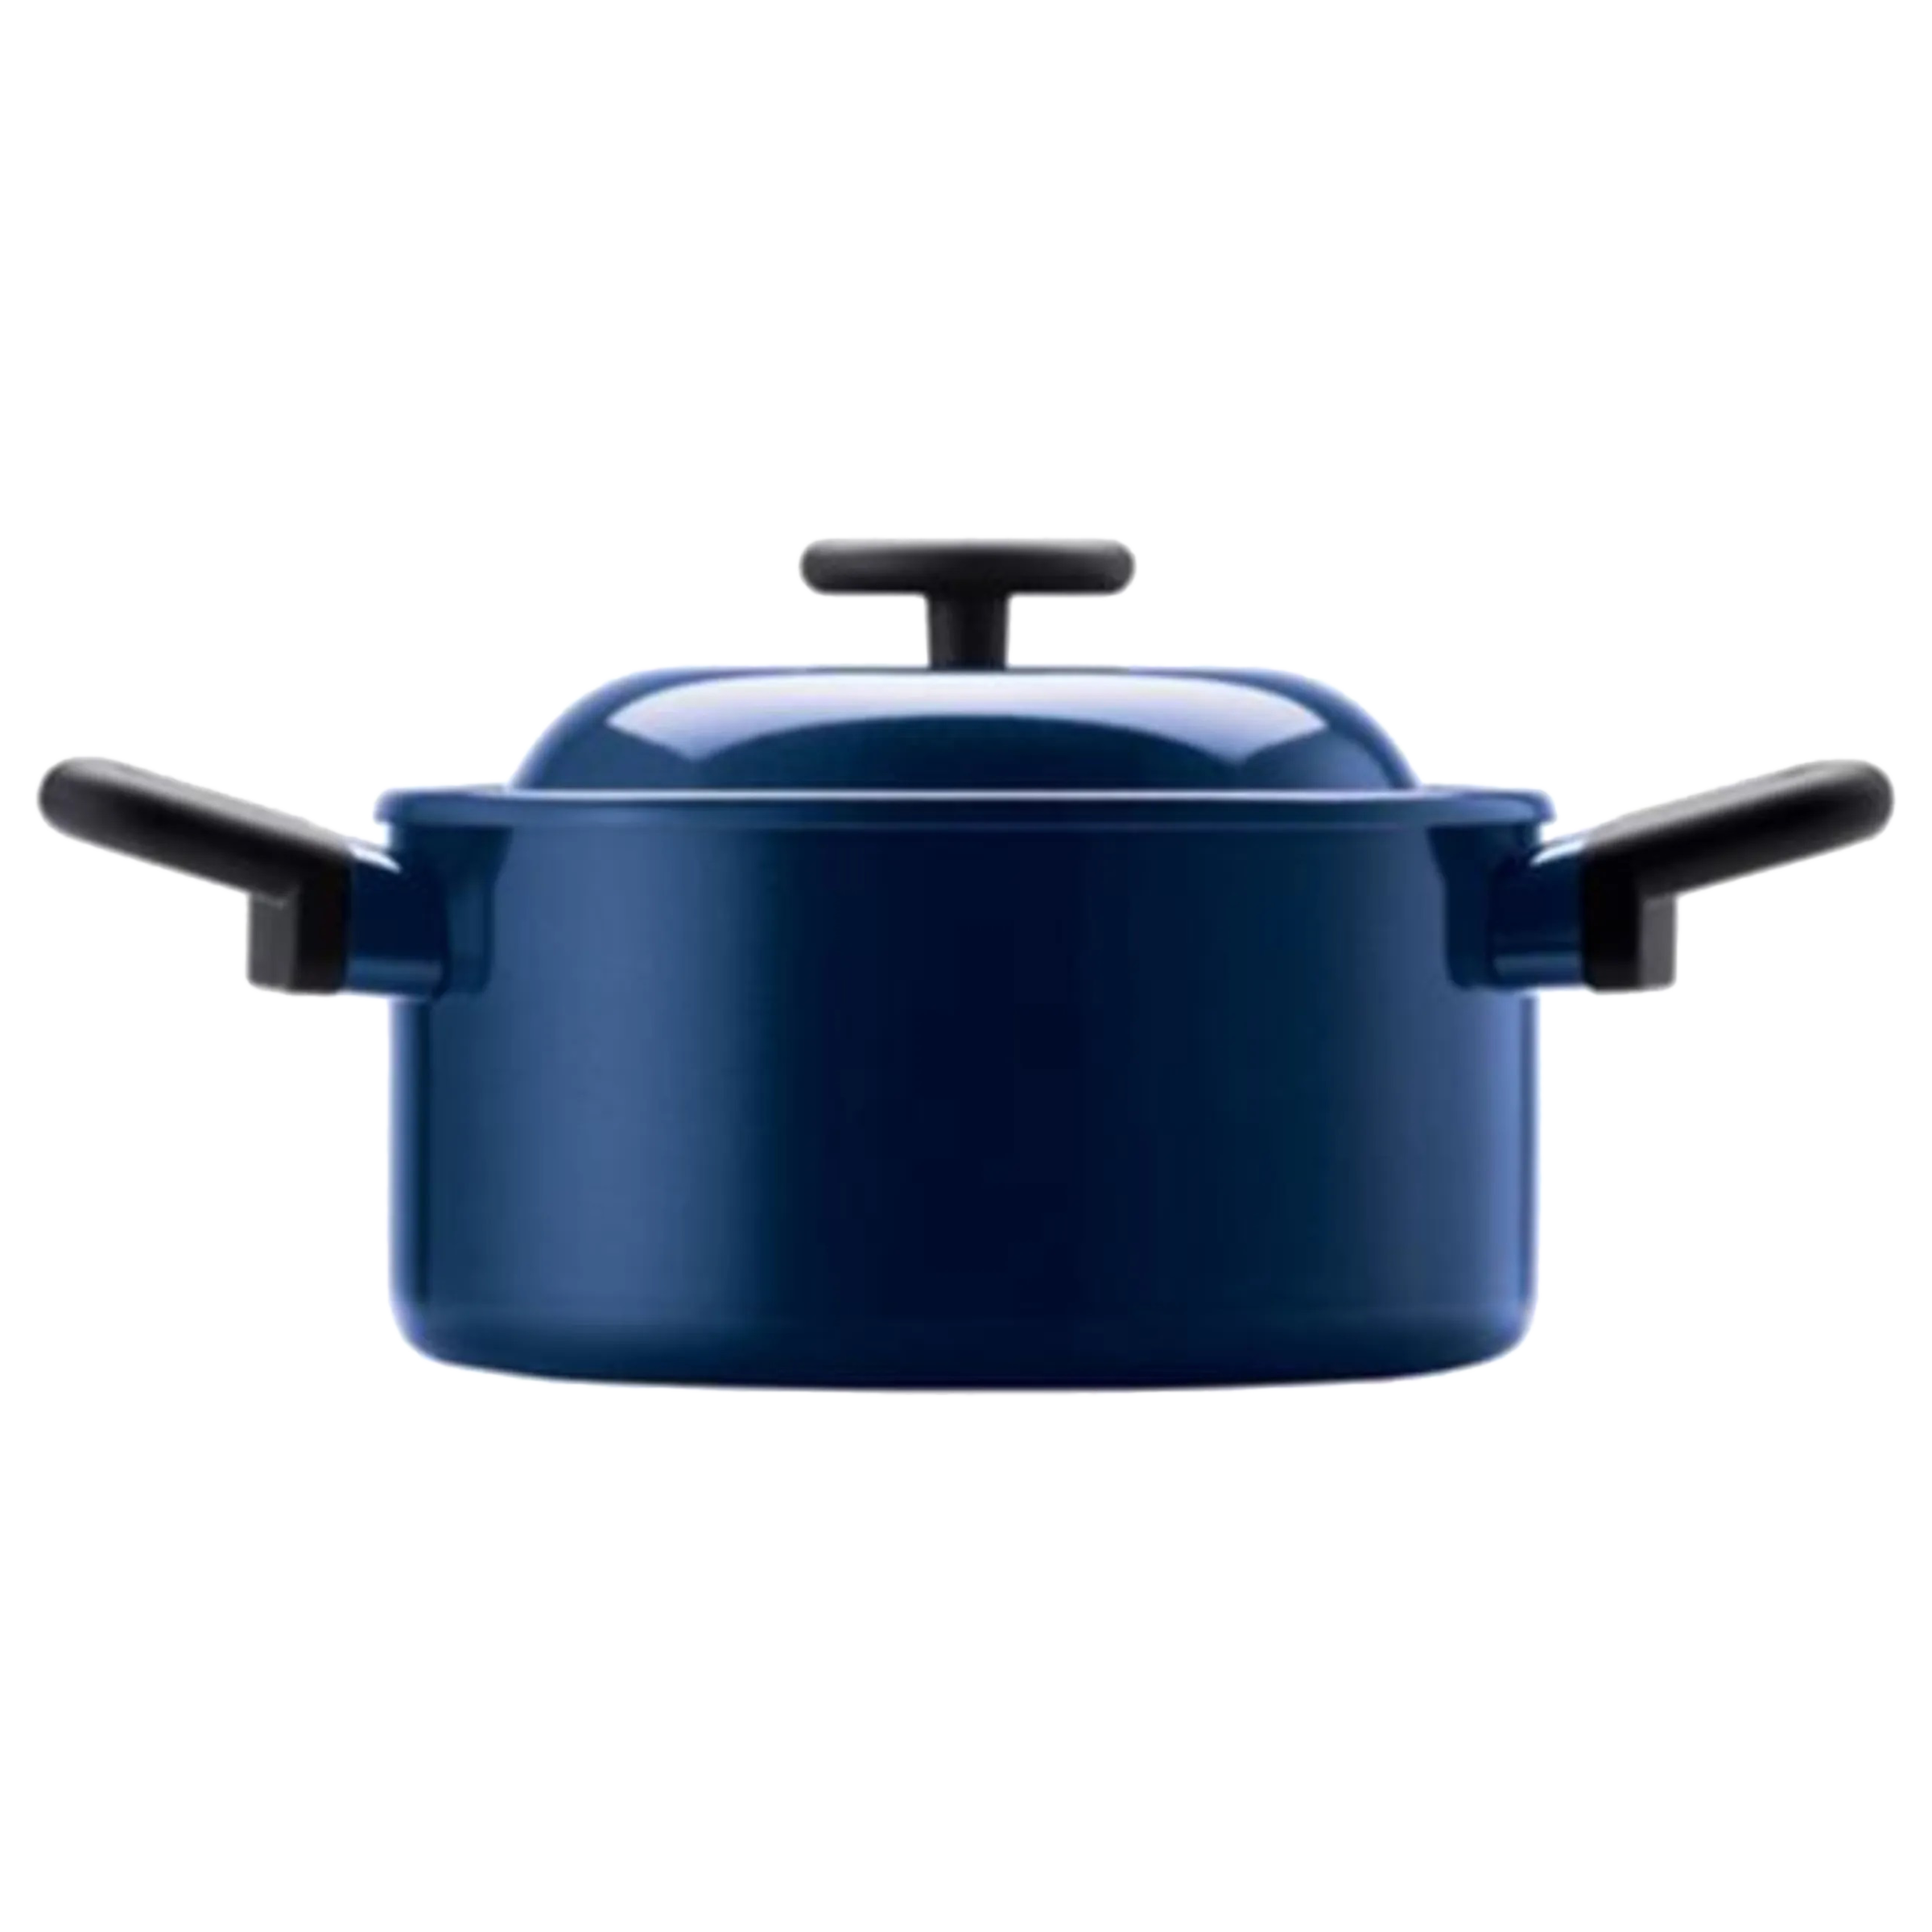 Lock & Lock Decore Casserole For Cookware (Upgraded Induction Technology, LDE1202IH, Royal Navy Blue)_1